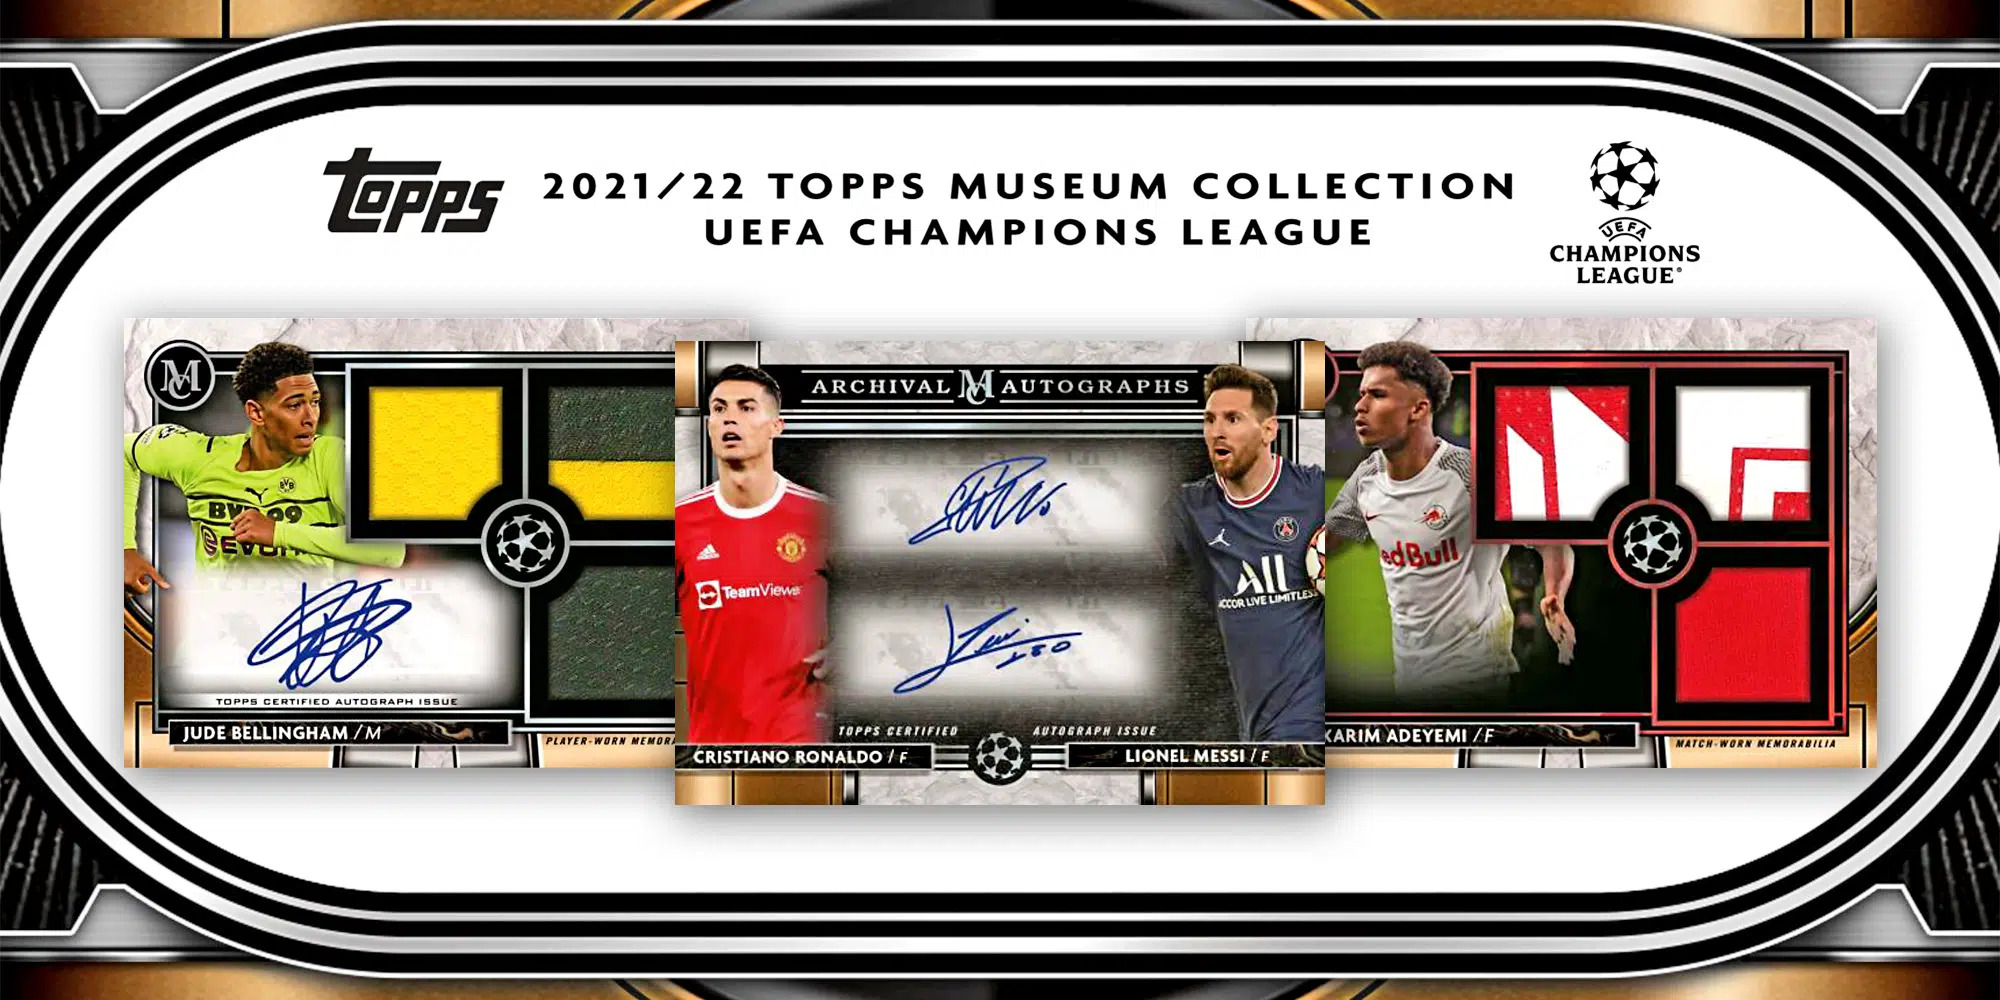 202122 Topps Museum Collection UEFA Champions League Soccer Card